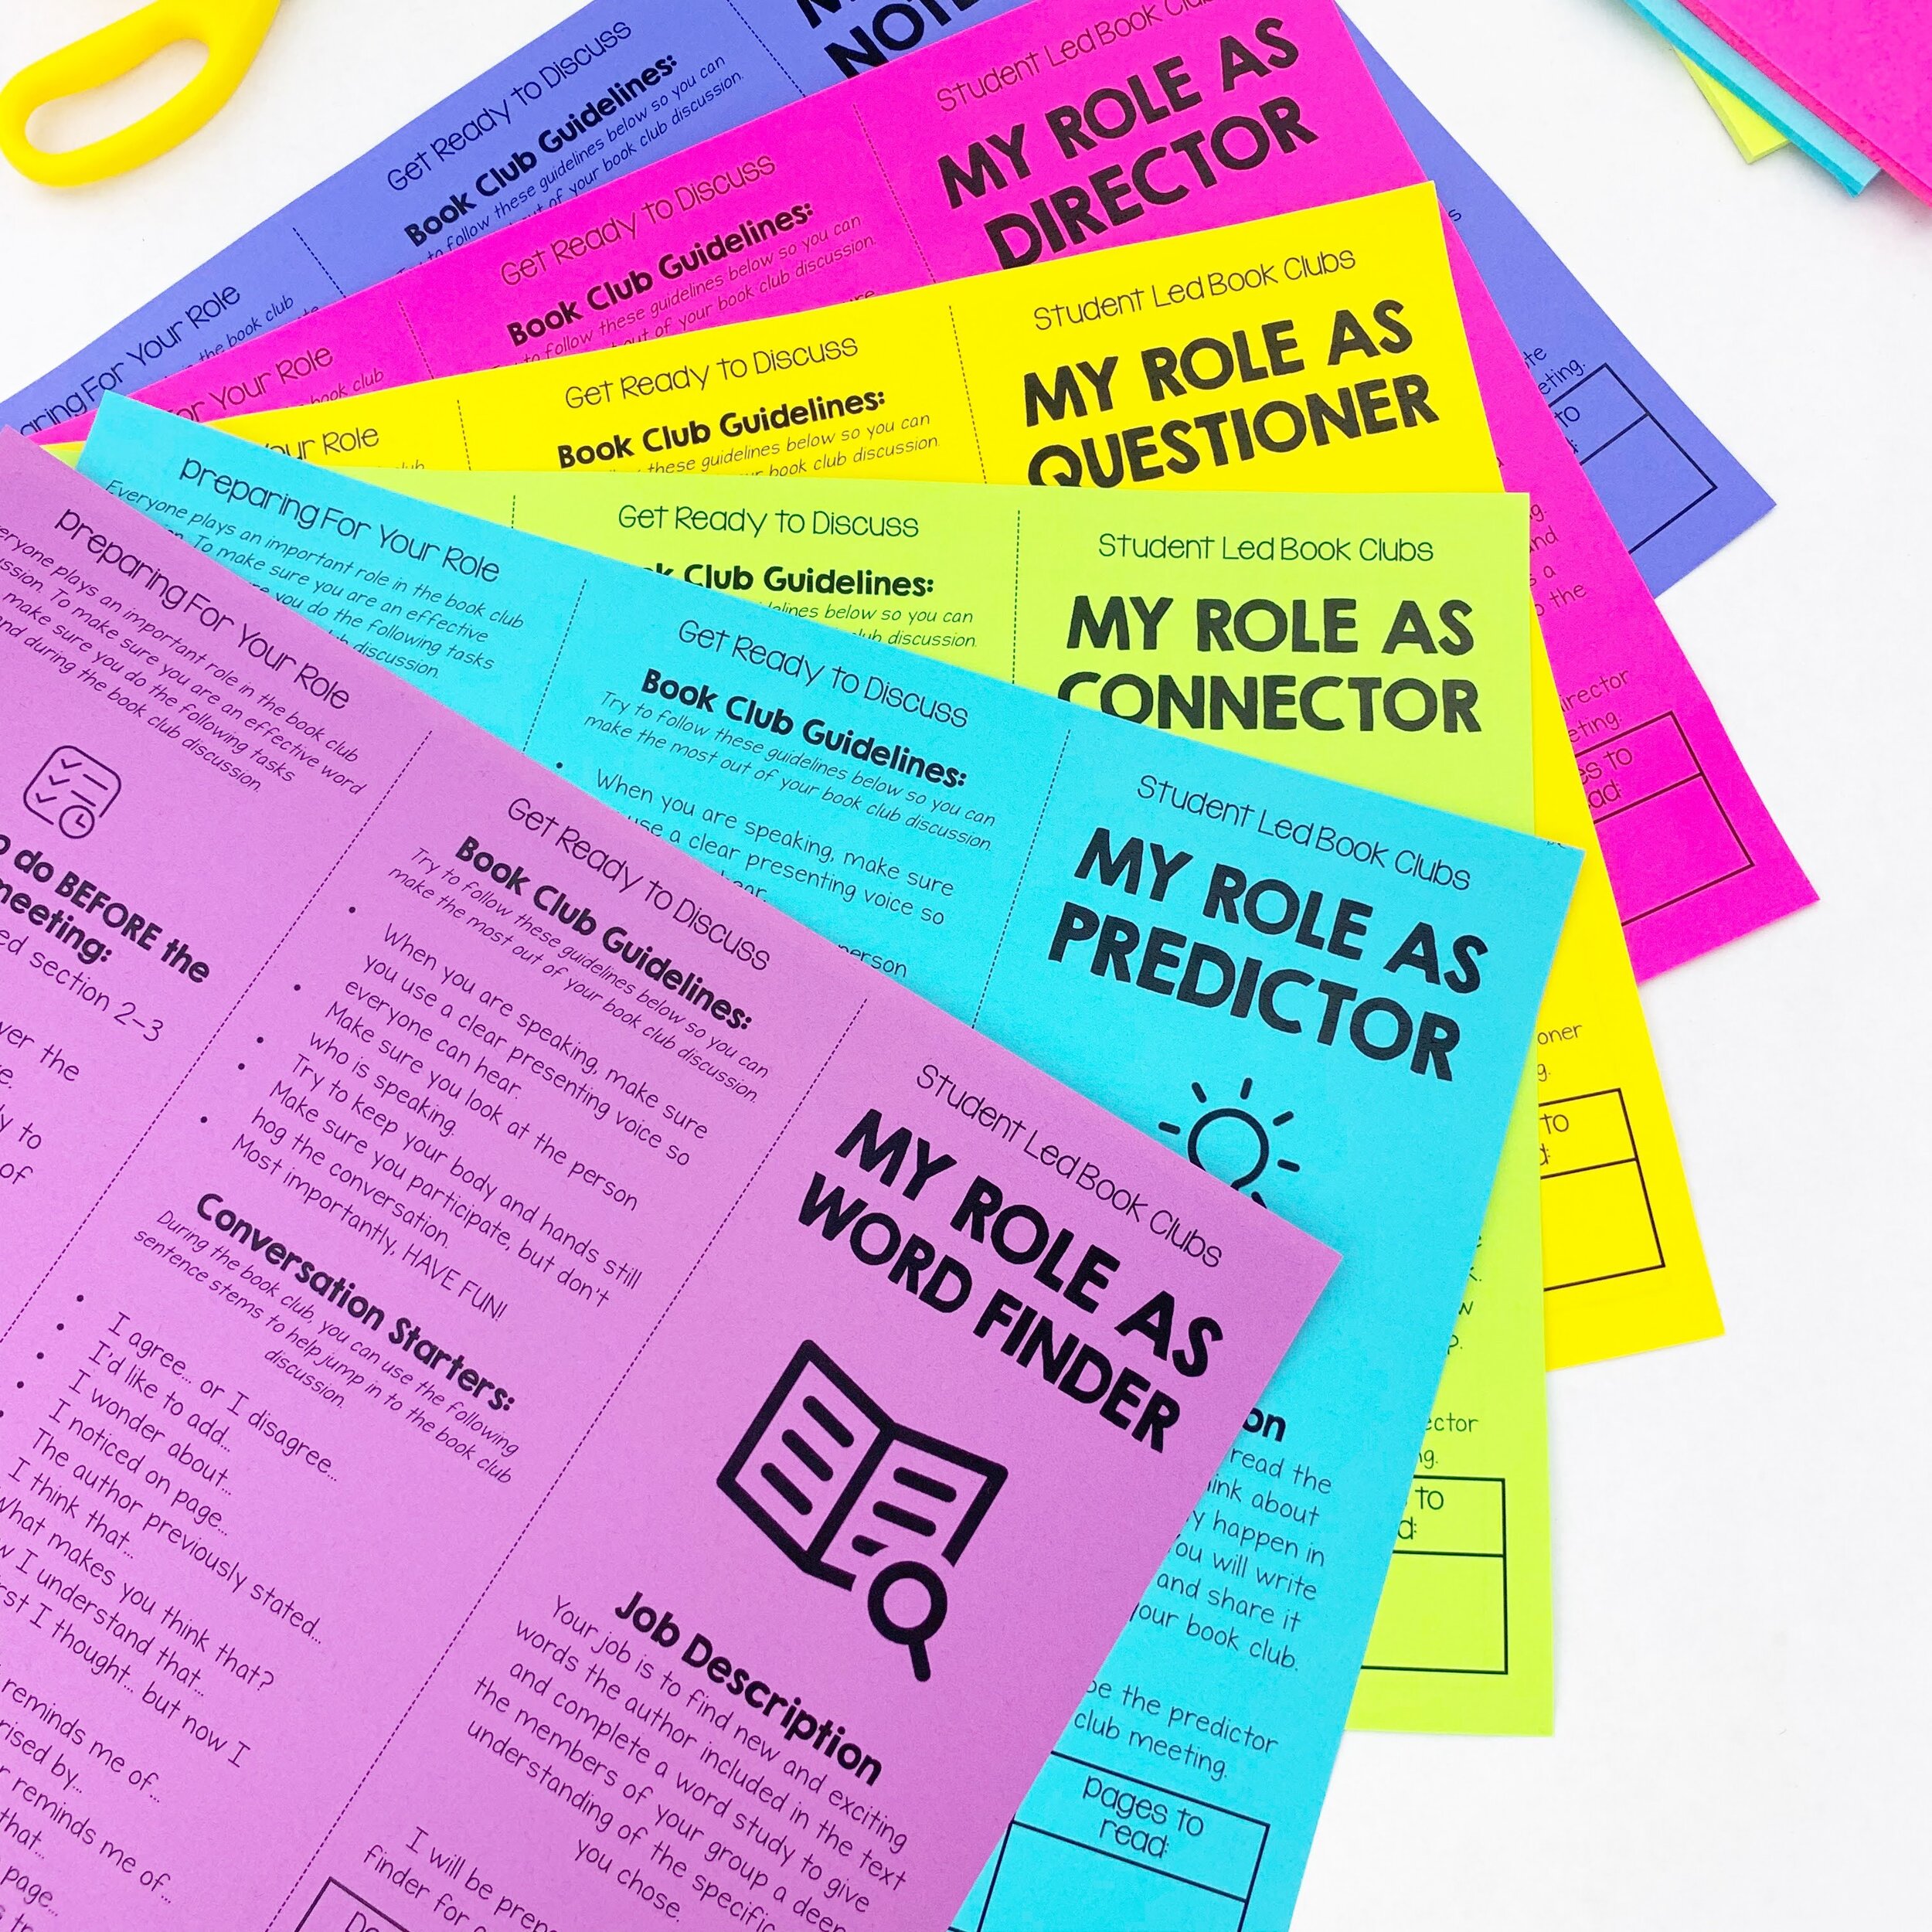 This image shows a set of student brochures teachers can use for book clubs in the classroom. The following brochure titles are pictured: word finder, predictor, connector, questioner, director. 